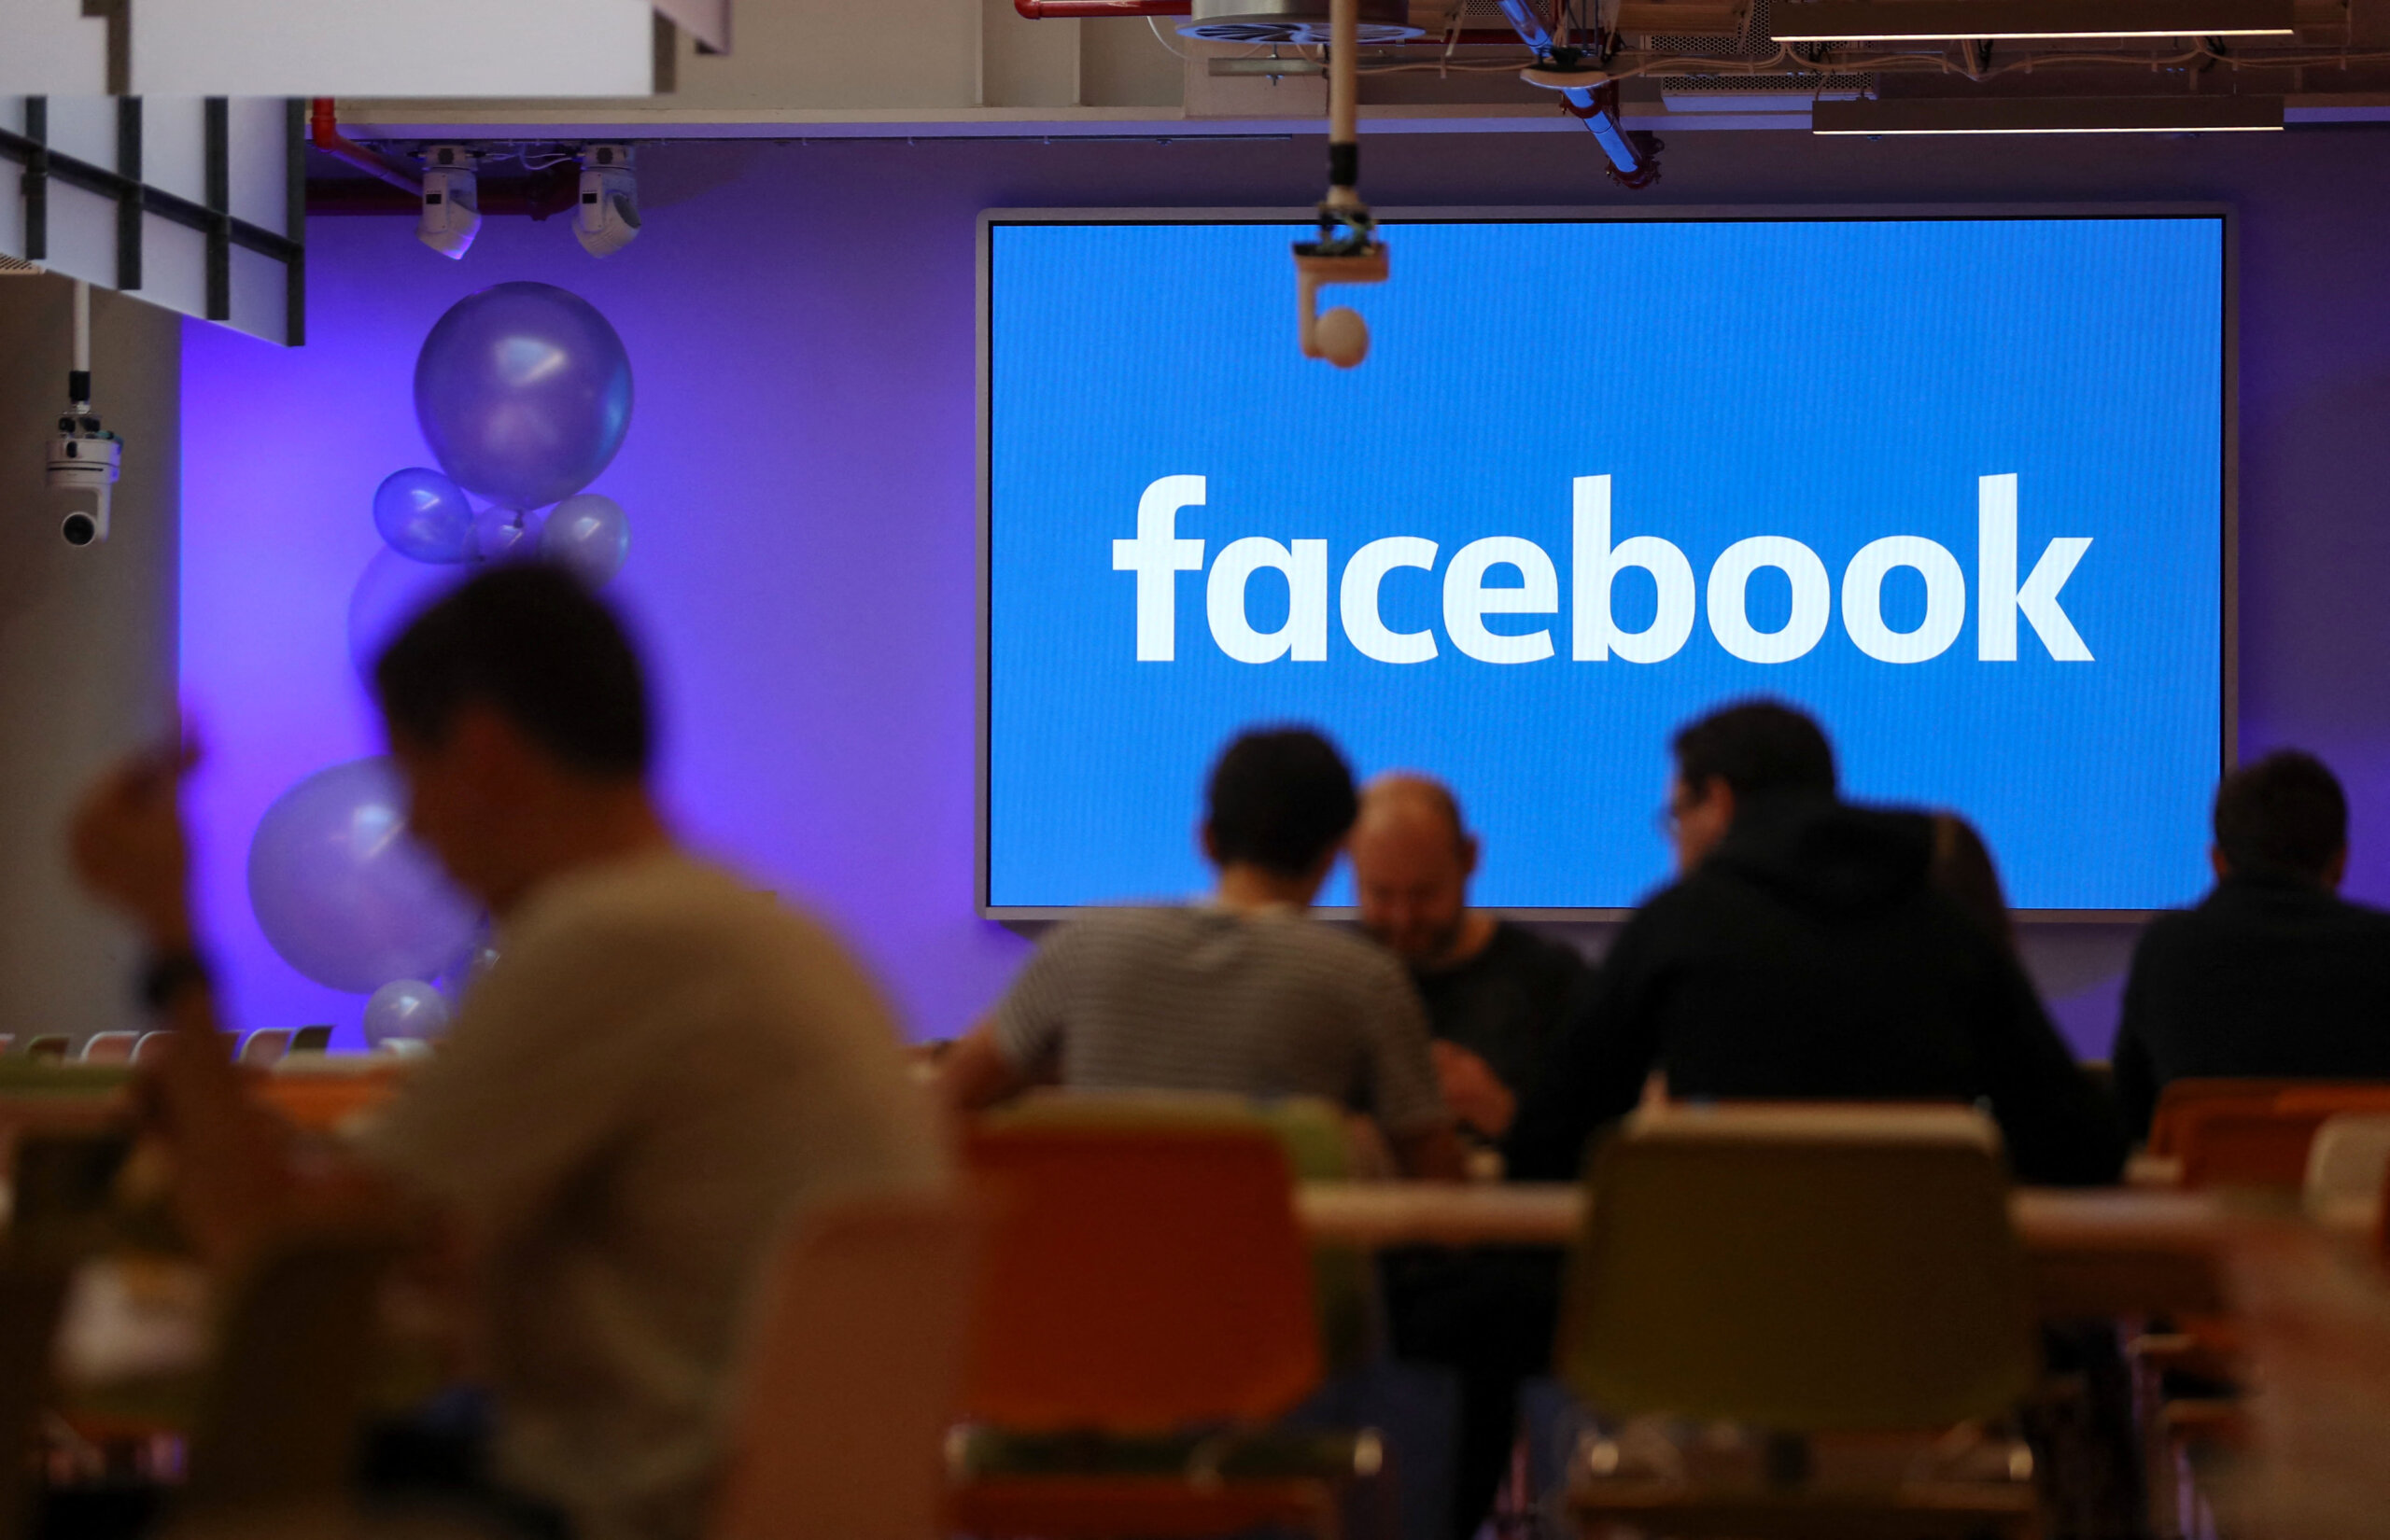 Facebook's data centers are powering machine learning tasks, including the algorithm that handles Facebook’s content recommendations. (Photo by Daniel LEAL-OLIVAS / AFP)